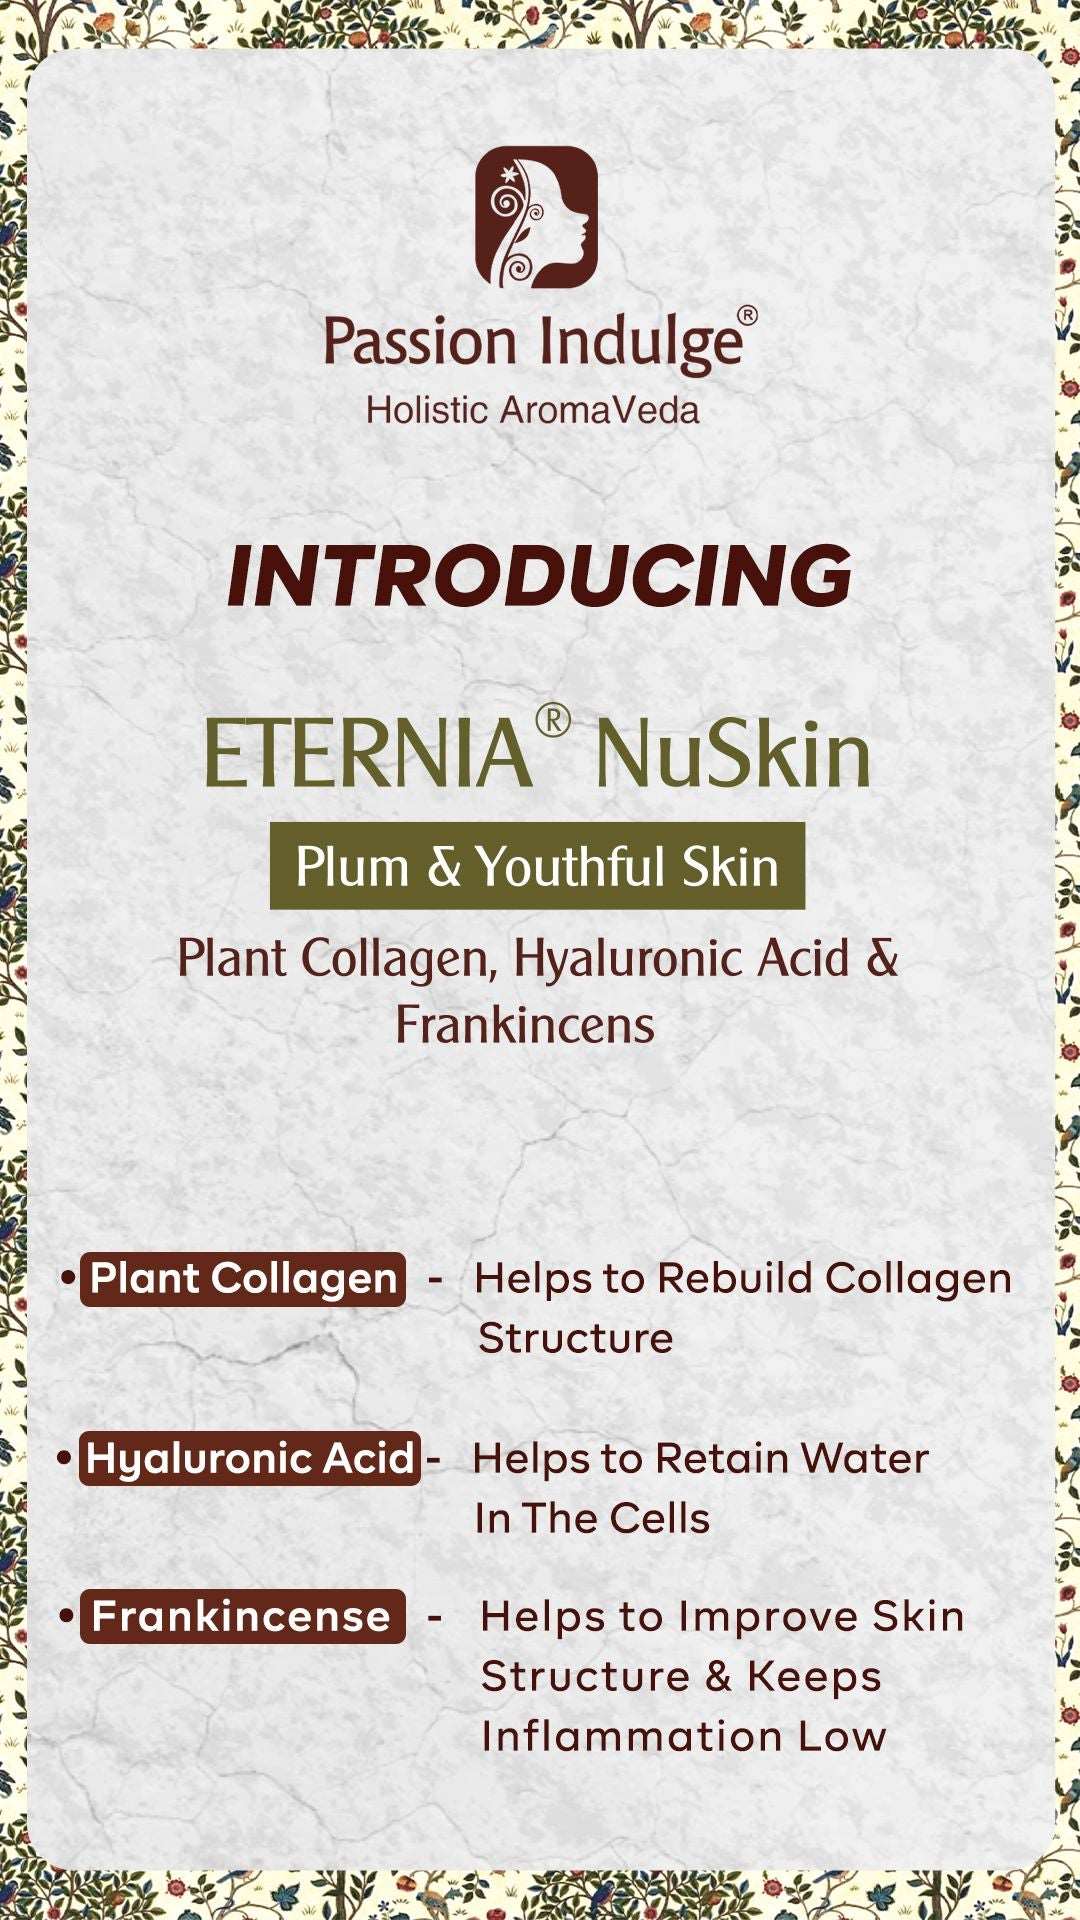 Eternia NuSkin Moisturizer 50gm For Youthful Skin, Anti-Aging | Anti-Wrinkle | Reduces Fine Lines & Wrinkles | Skin Hydration & Nourishes | Healthy Skin | SPF 15 With Plant Collagen, Hyaluronic Acid & Frankincense | Natural